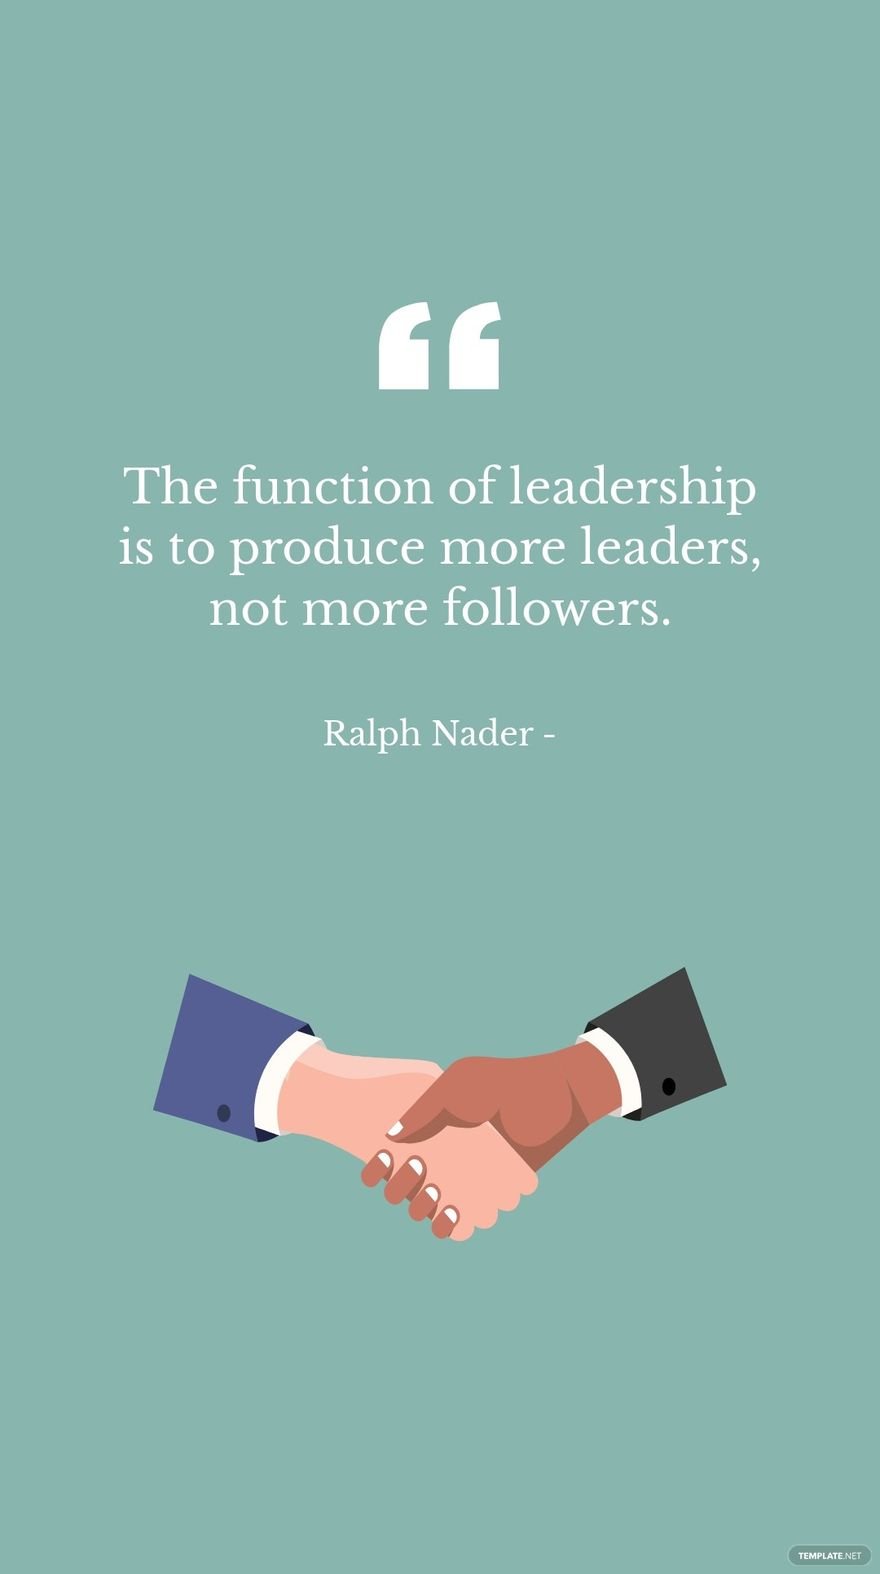 Free Ralph Nader - The function of leadership is to produce more leaders, not more followers. in JPG